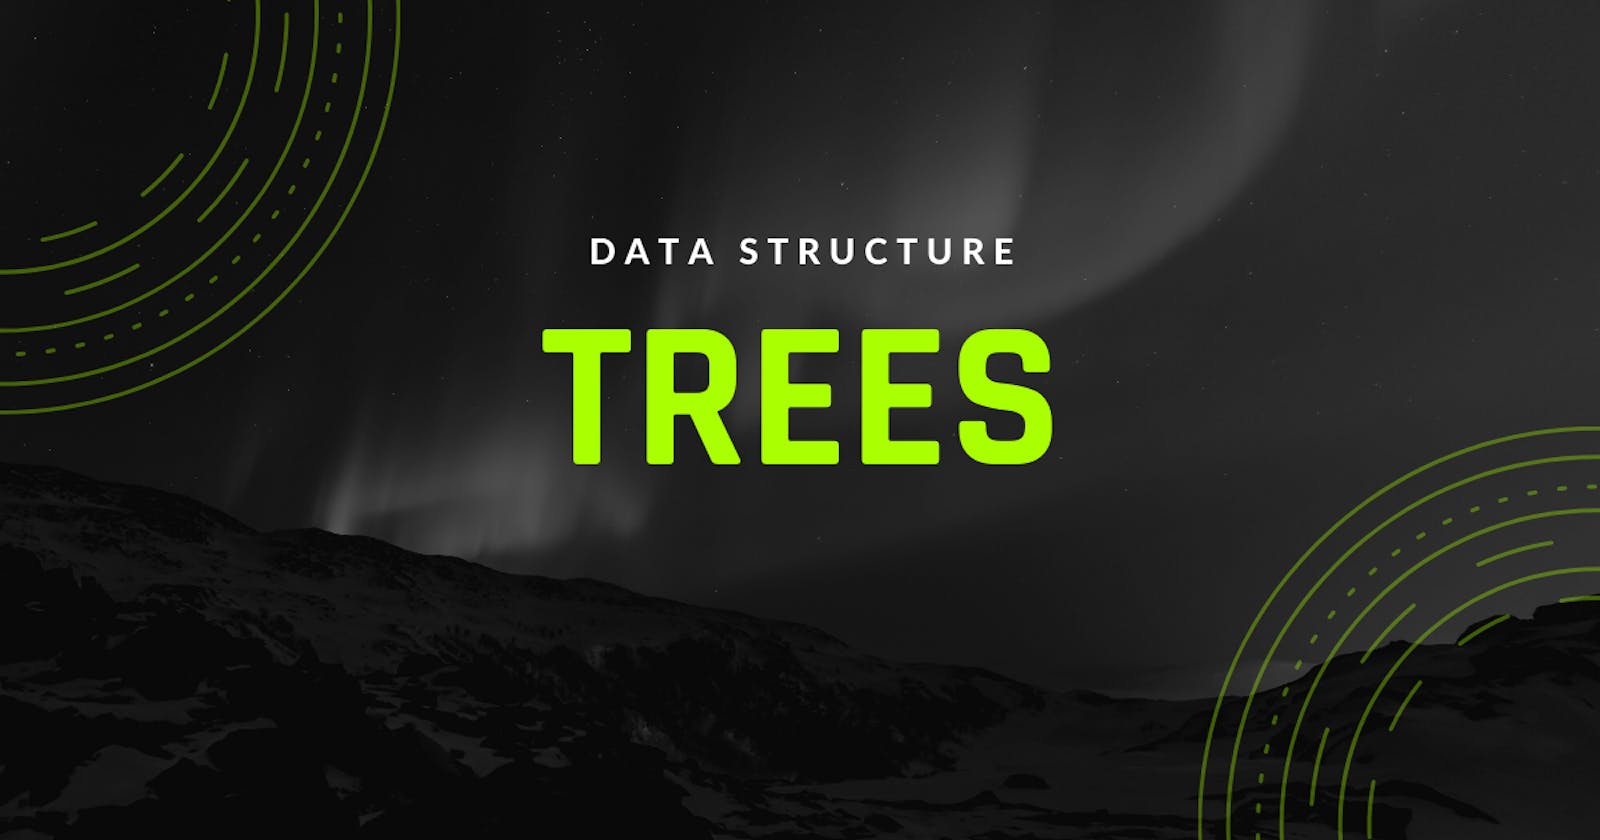 Data Structure: Trees